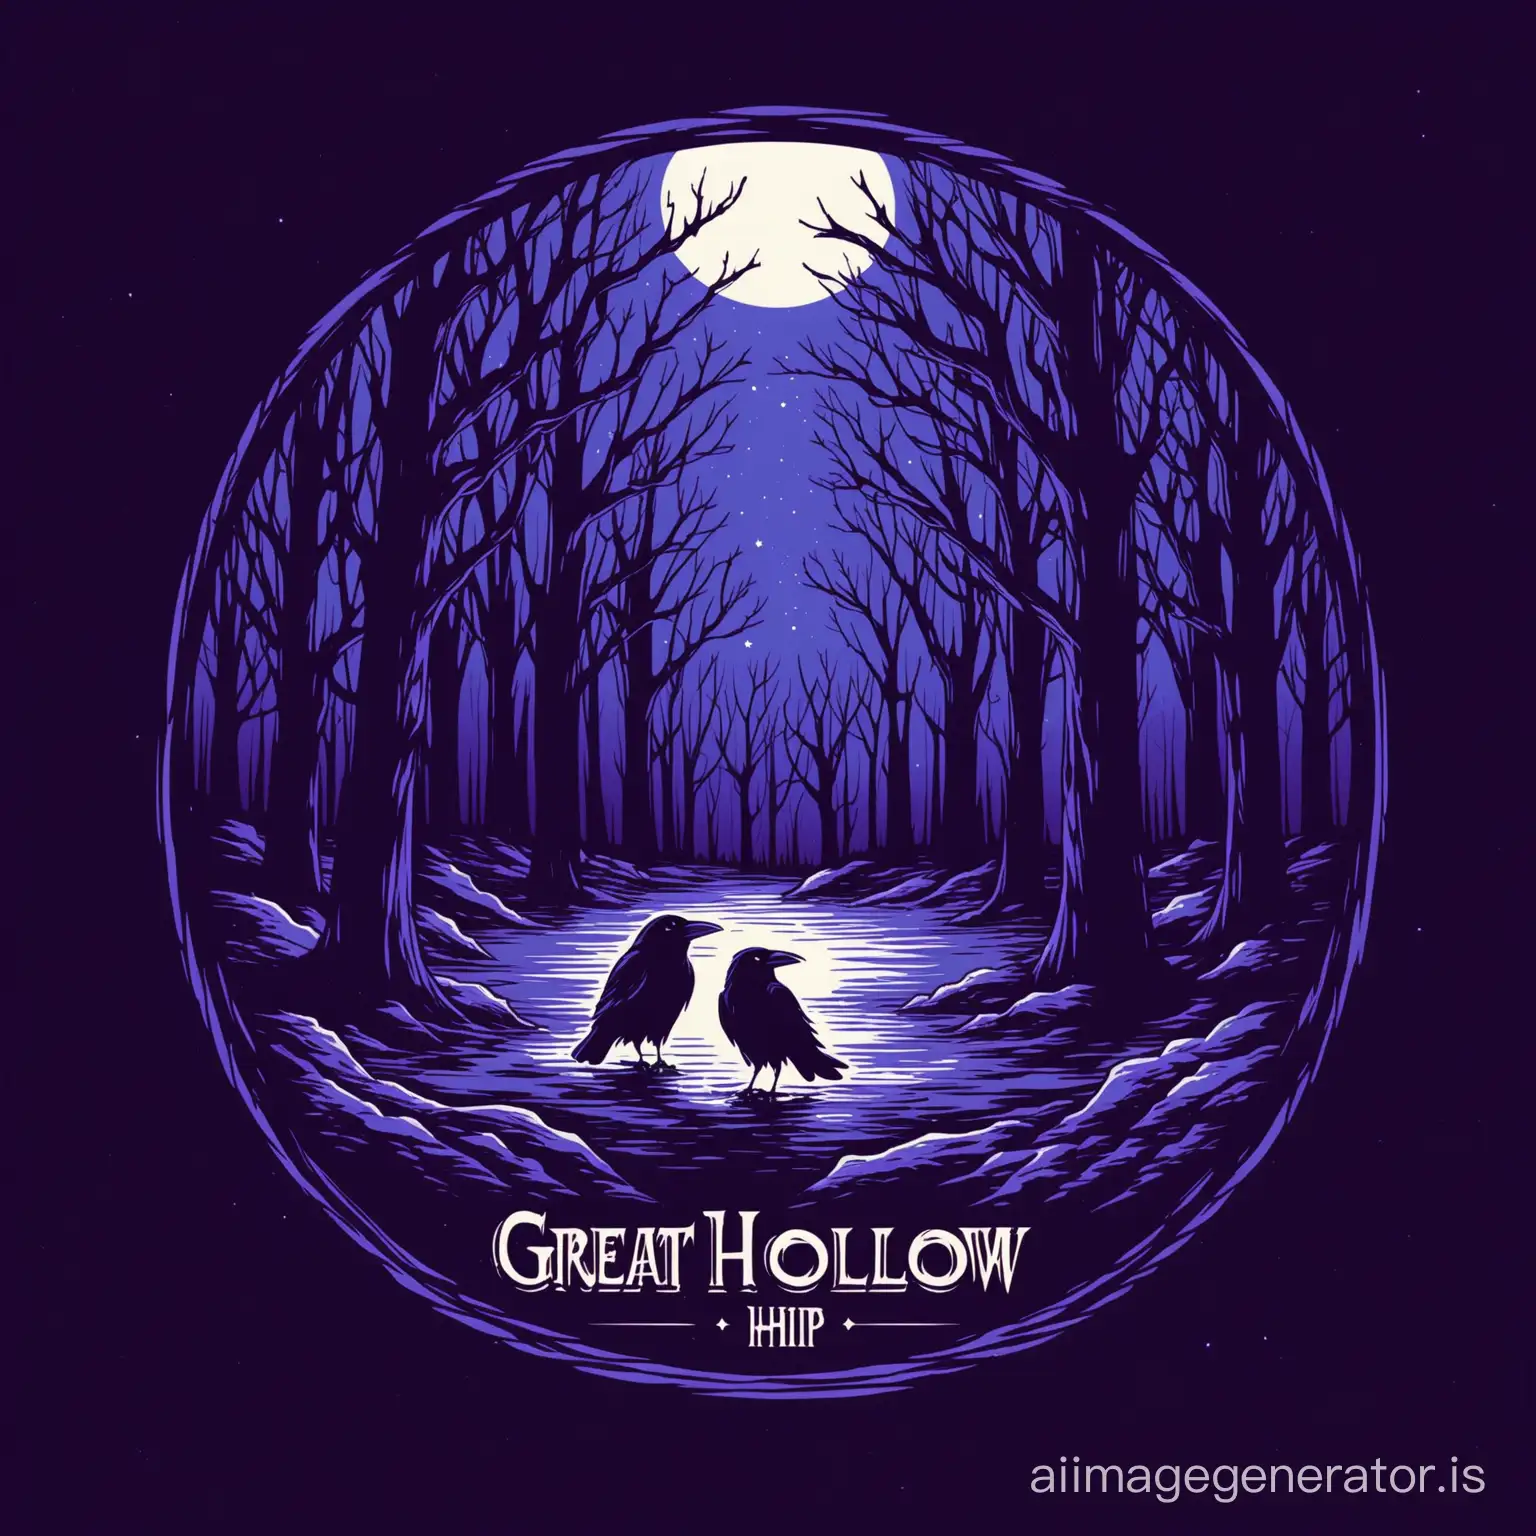 logo for lofi hip hop group called great hollow. Use cool font and mystical trees. have a raven somewhere in the image.